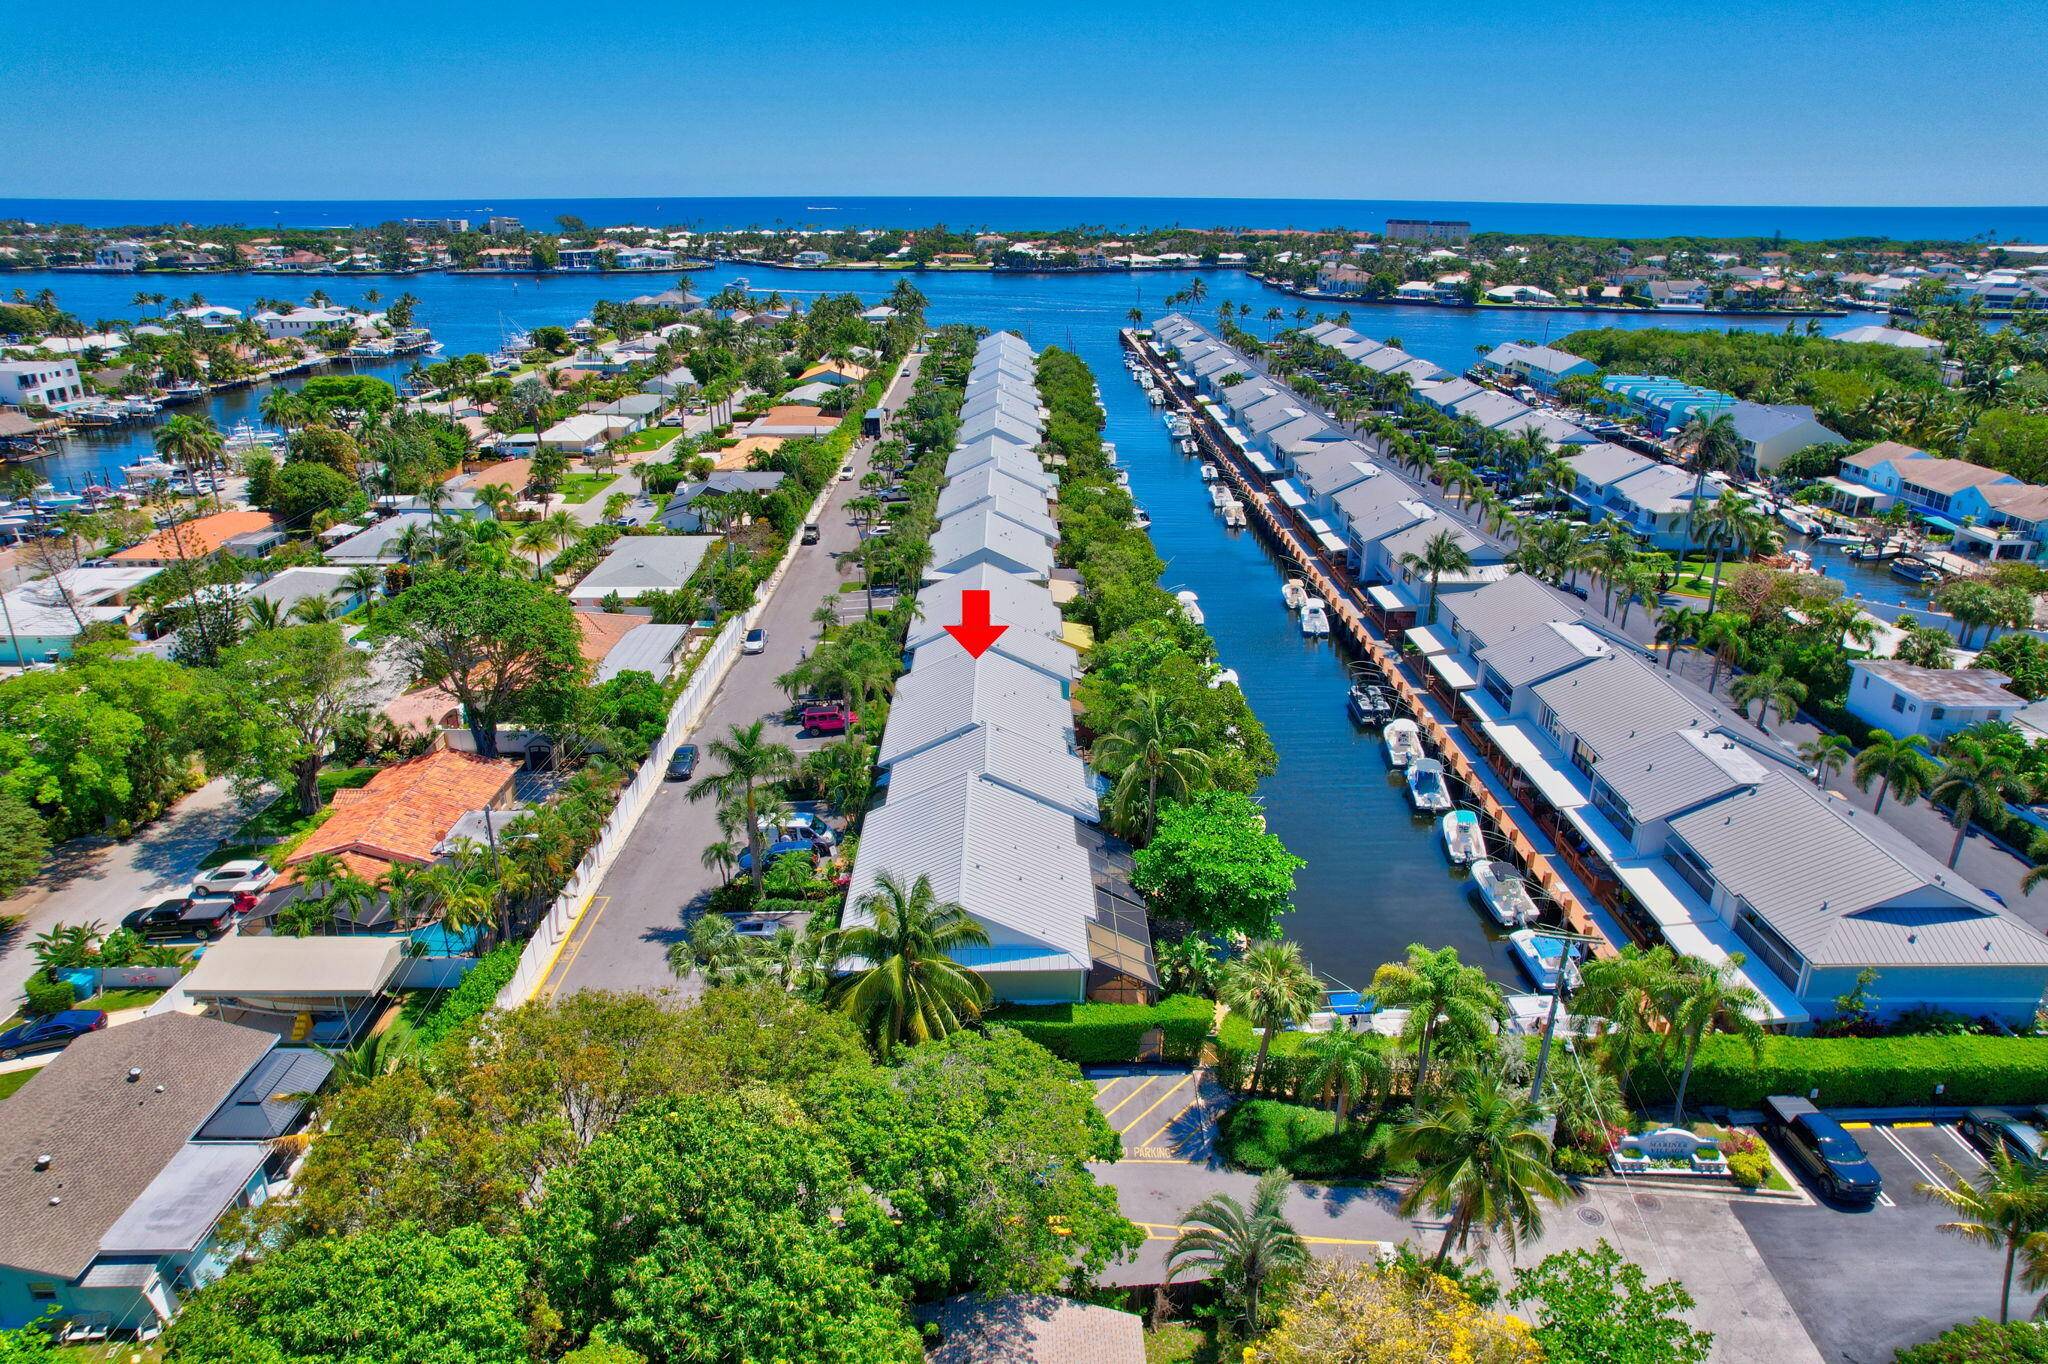 Fantastic Waterfront Key West Style Townhouse, with Private Deepwater Boat Dock, This Community Allows Boat Lifts, No Fixed Briges, Just Minutes to the Ocean !